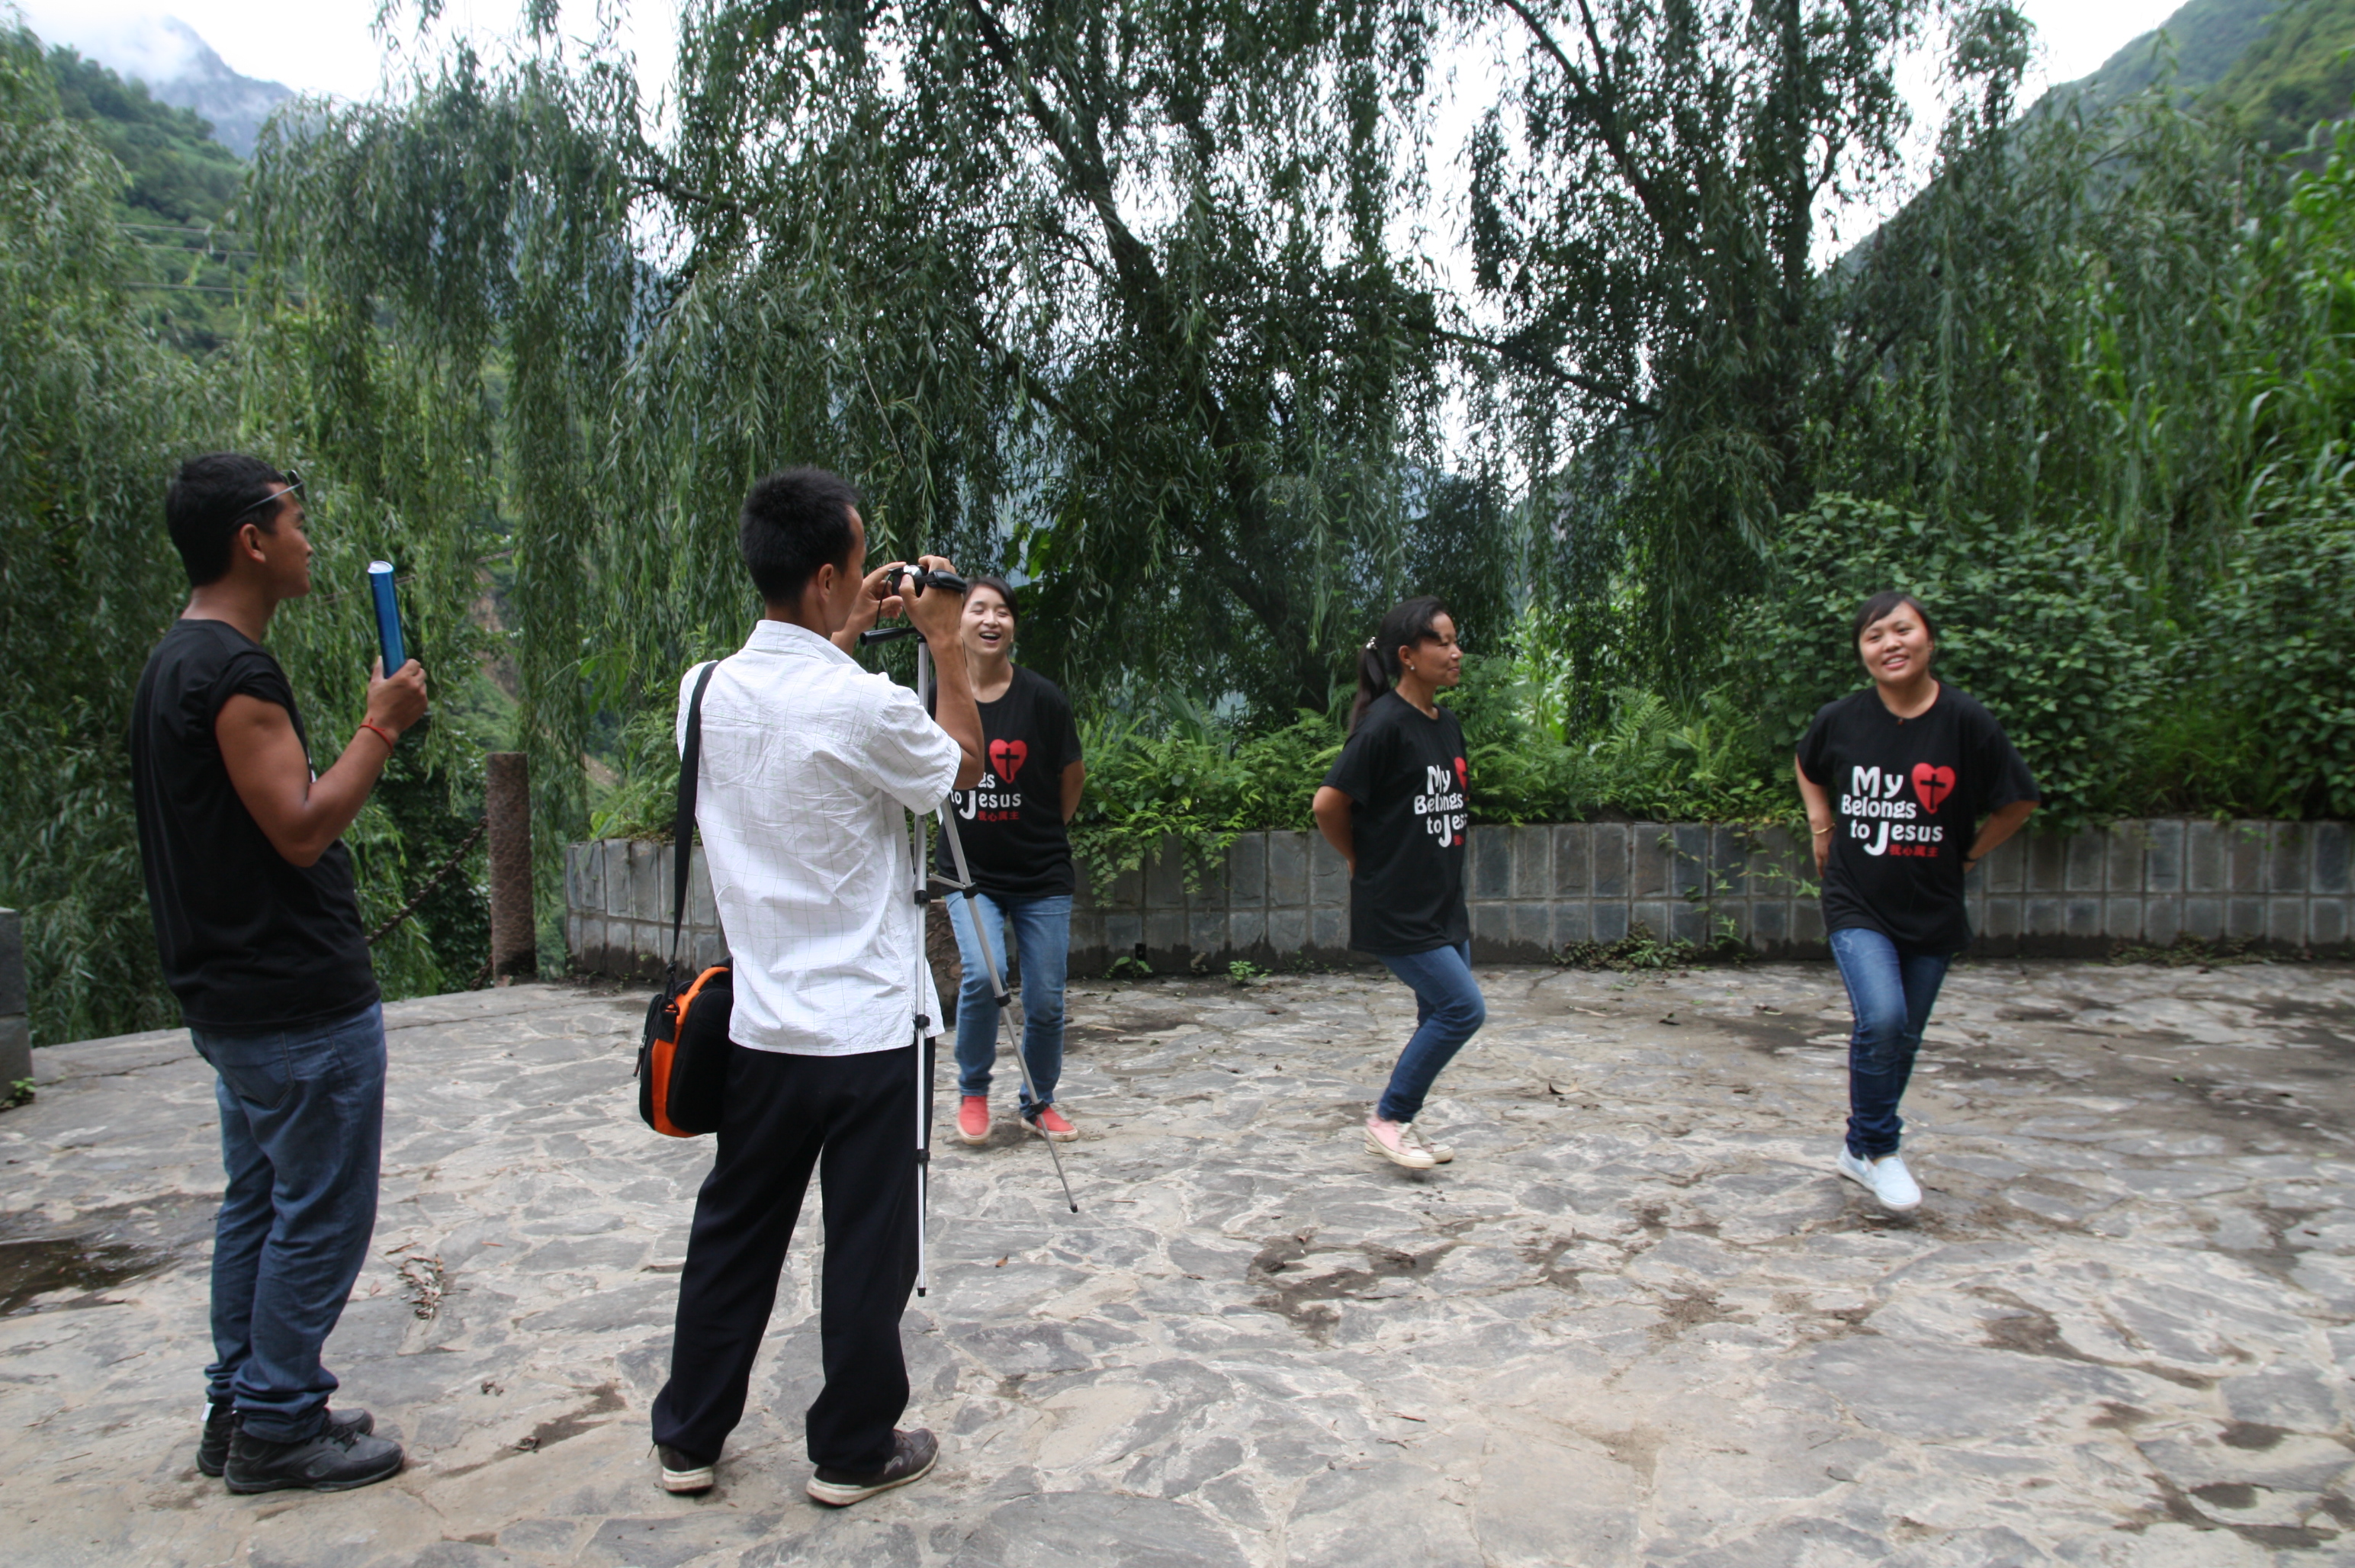 Lisu music group taking videos for their second music DVD, Fugong County, 23 June 2014. (Photo: Ying Diao)